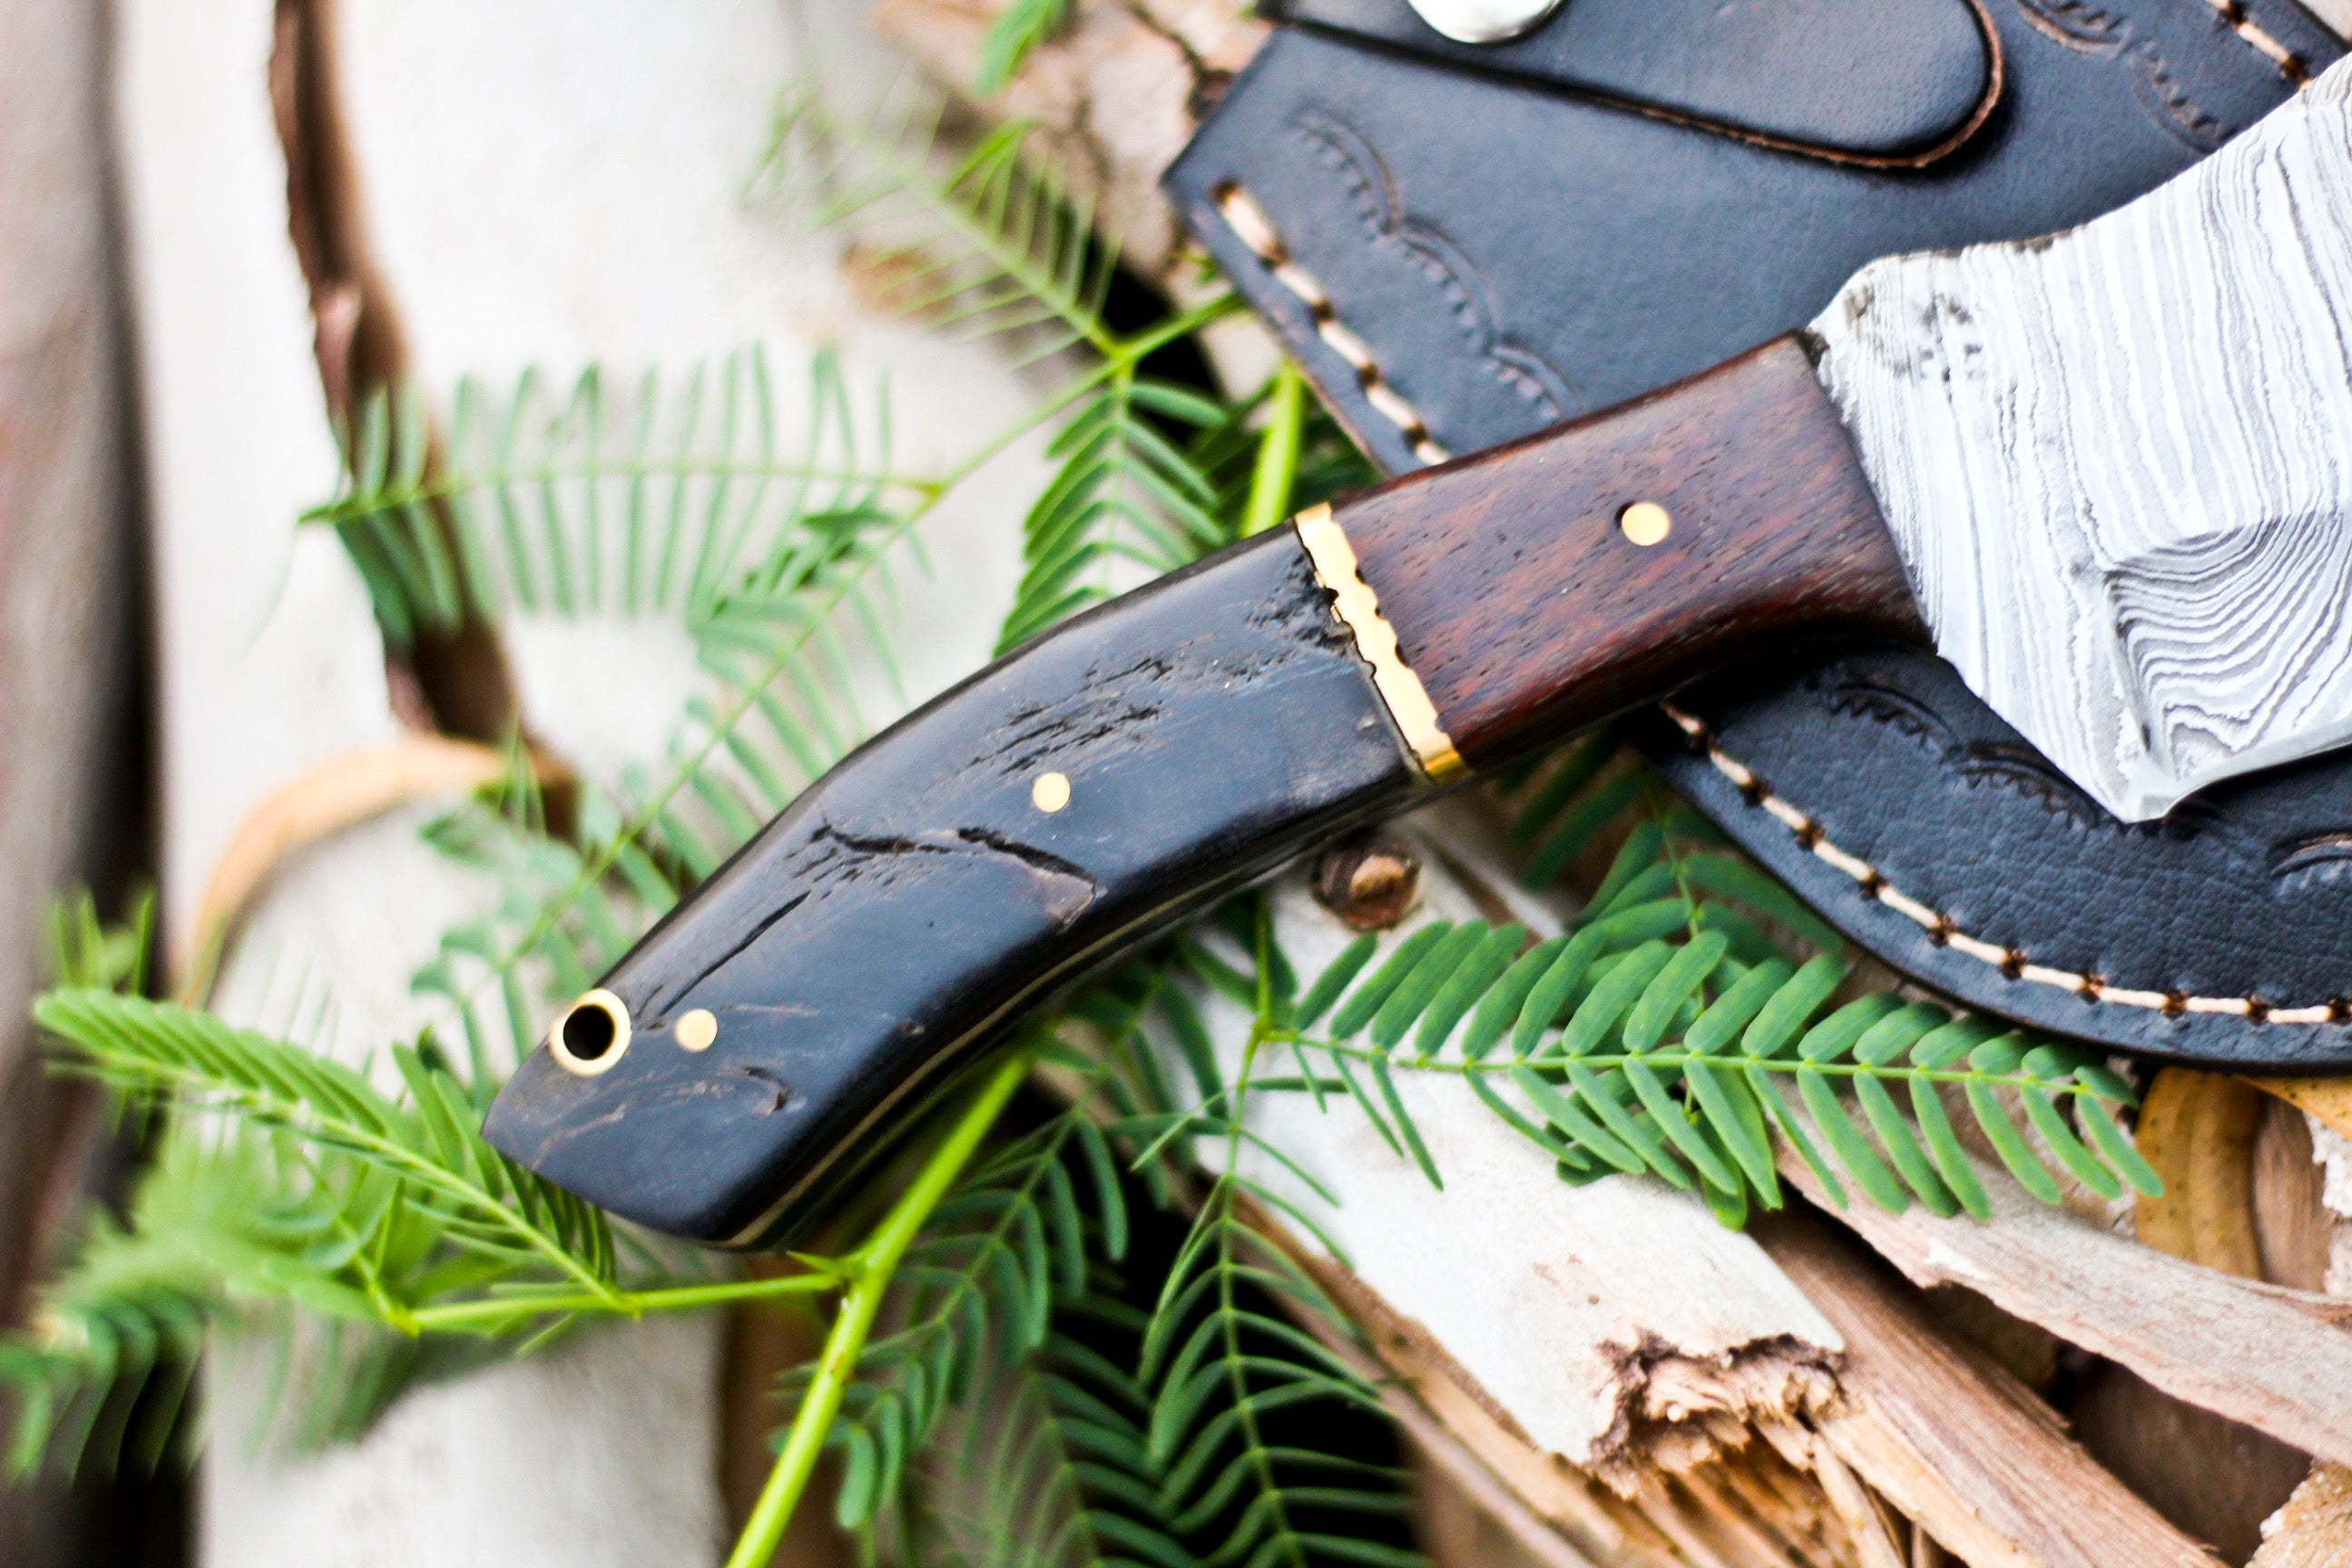 <h3>Handmade Damascus Steel Hunting Tracker Knife With Ram Horn _ Cocobolo Wood Handle</h3>